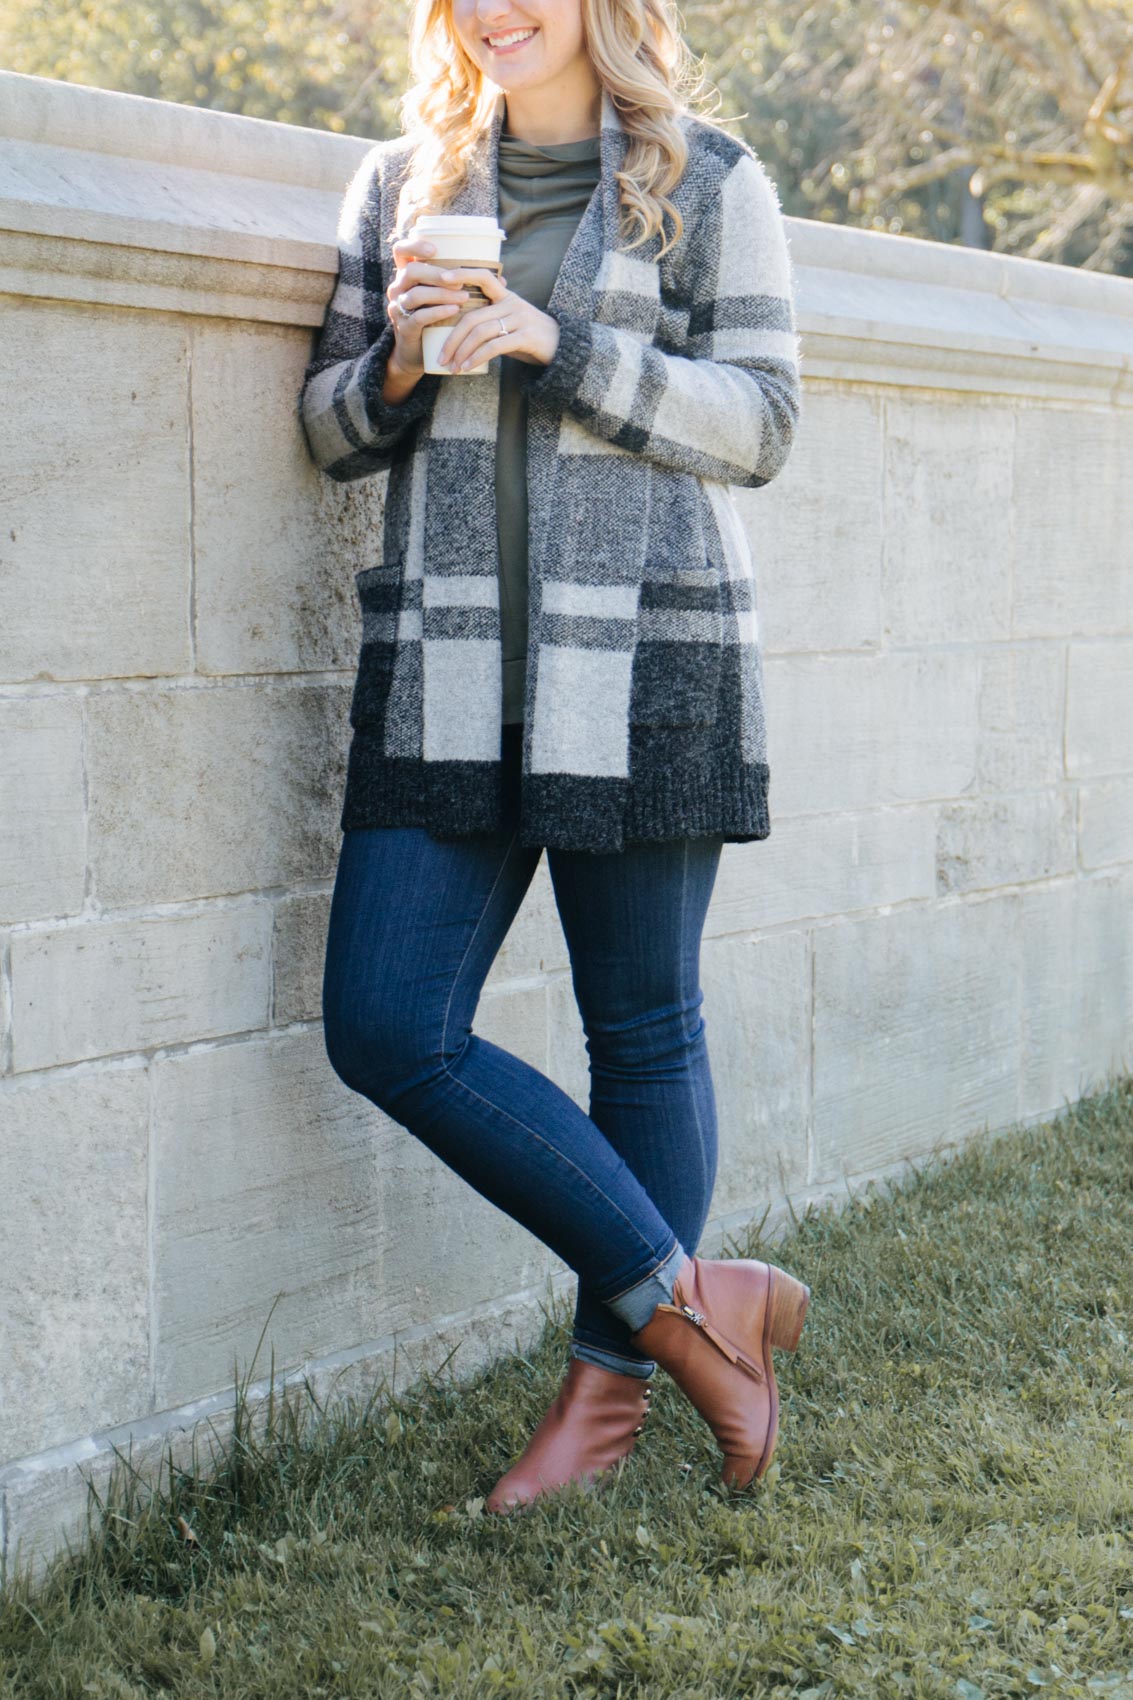 cute fall outfit for 2020 featuring the best ankle boots, dark skinny jeans, and a cozy long cardigan styled by Allyn Lewis